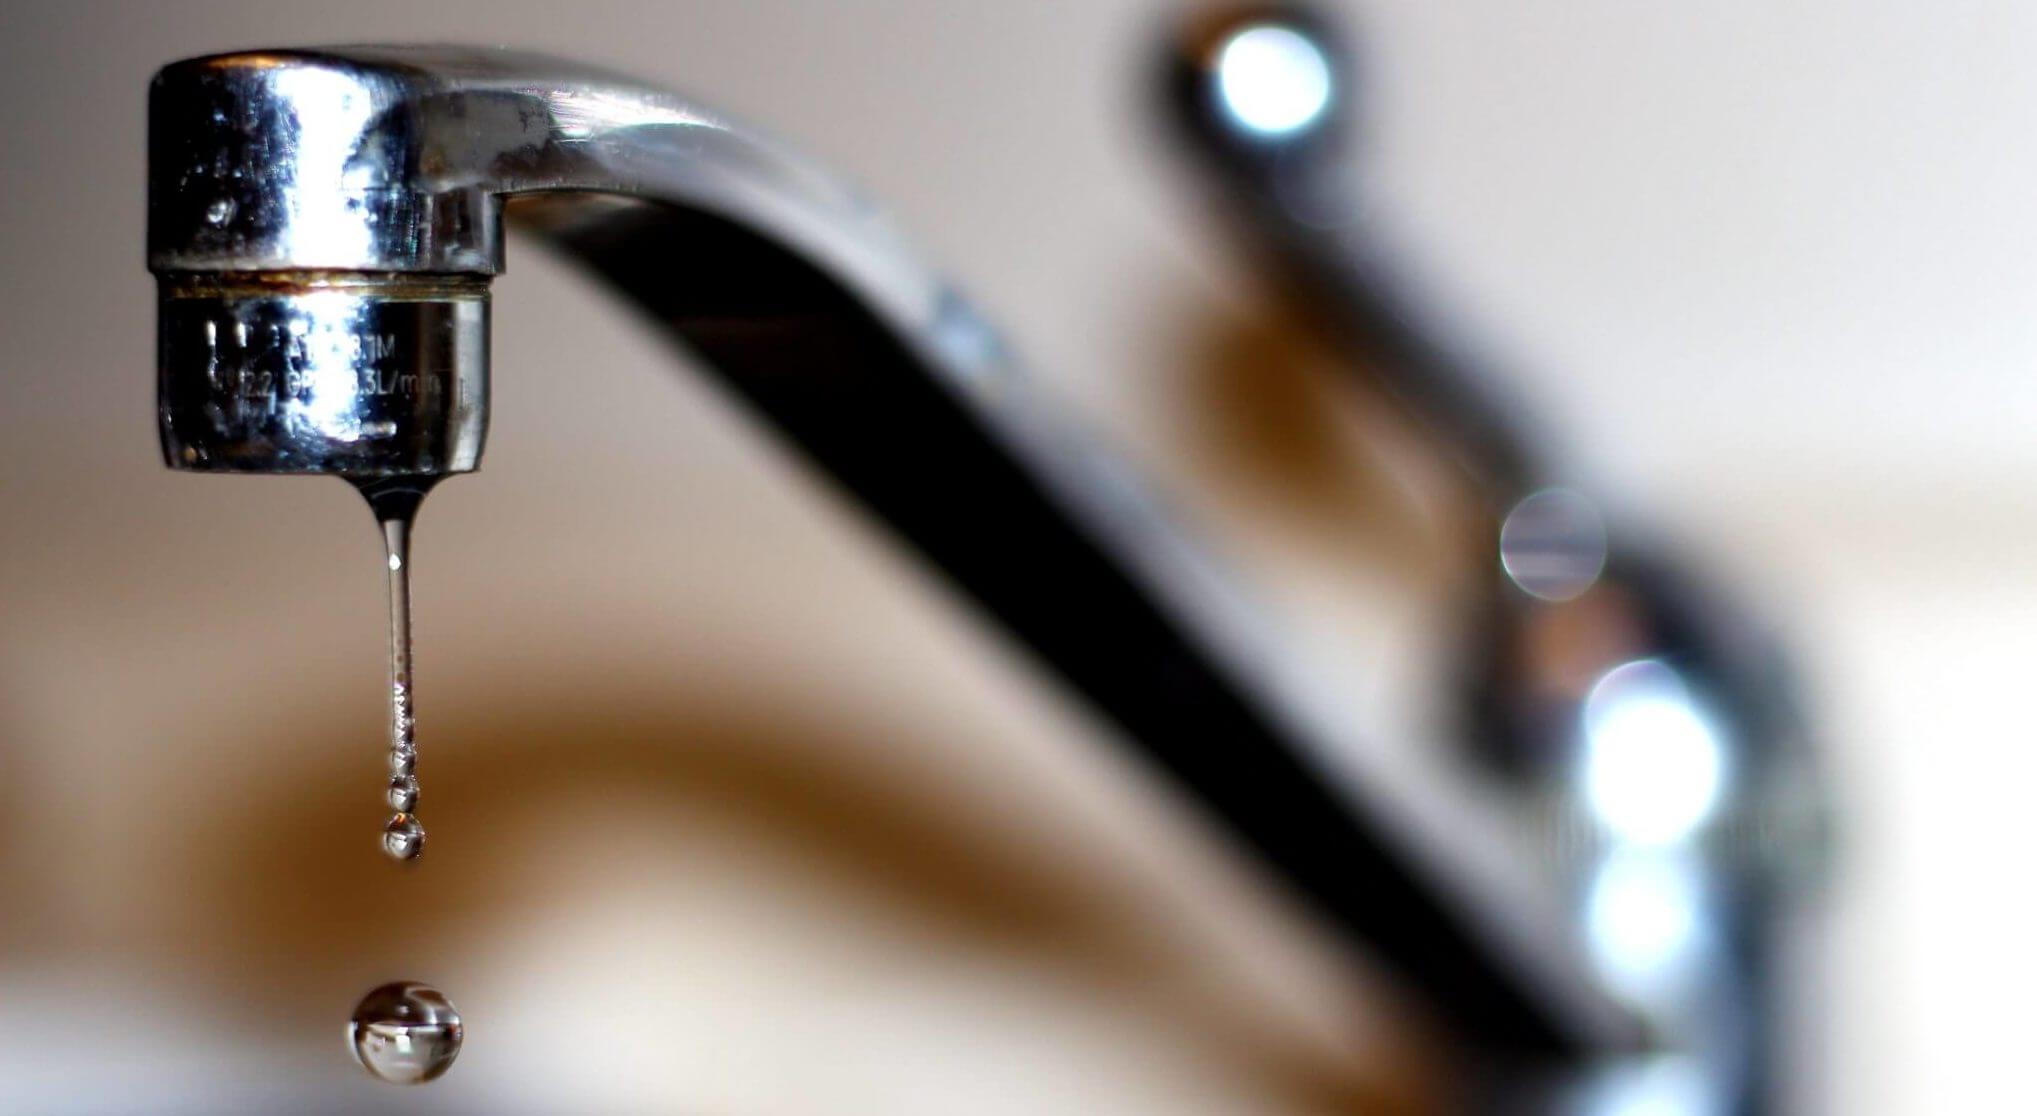 How To Fix A Dripping Bathroom Faucet Plumbing Solutions